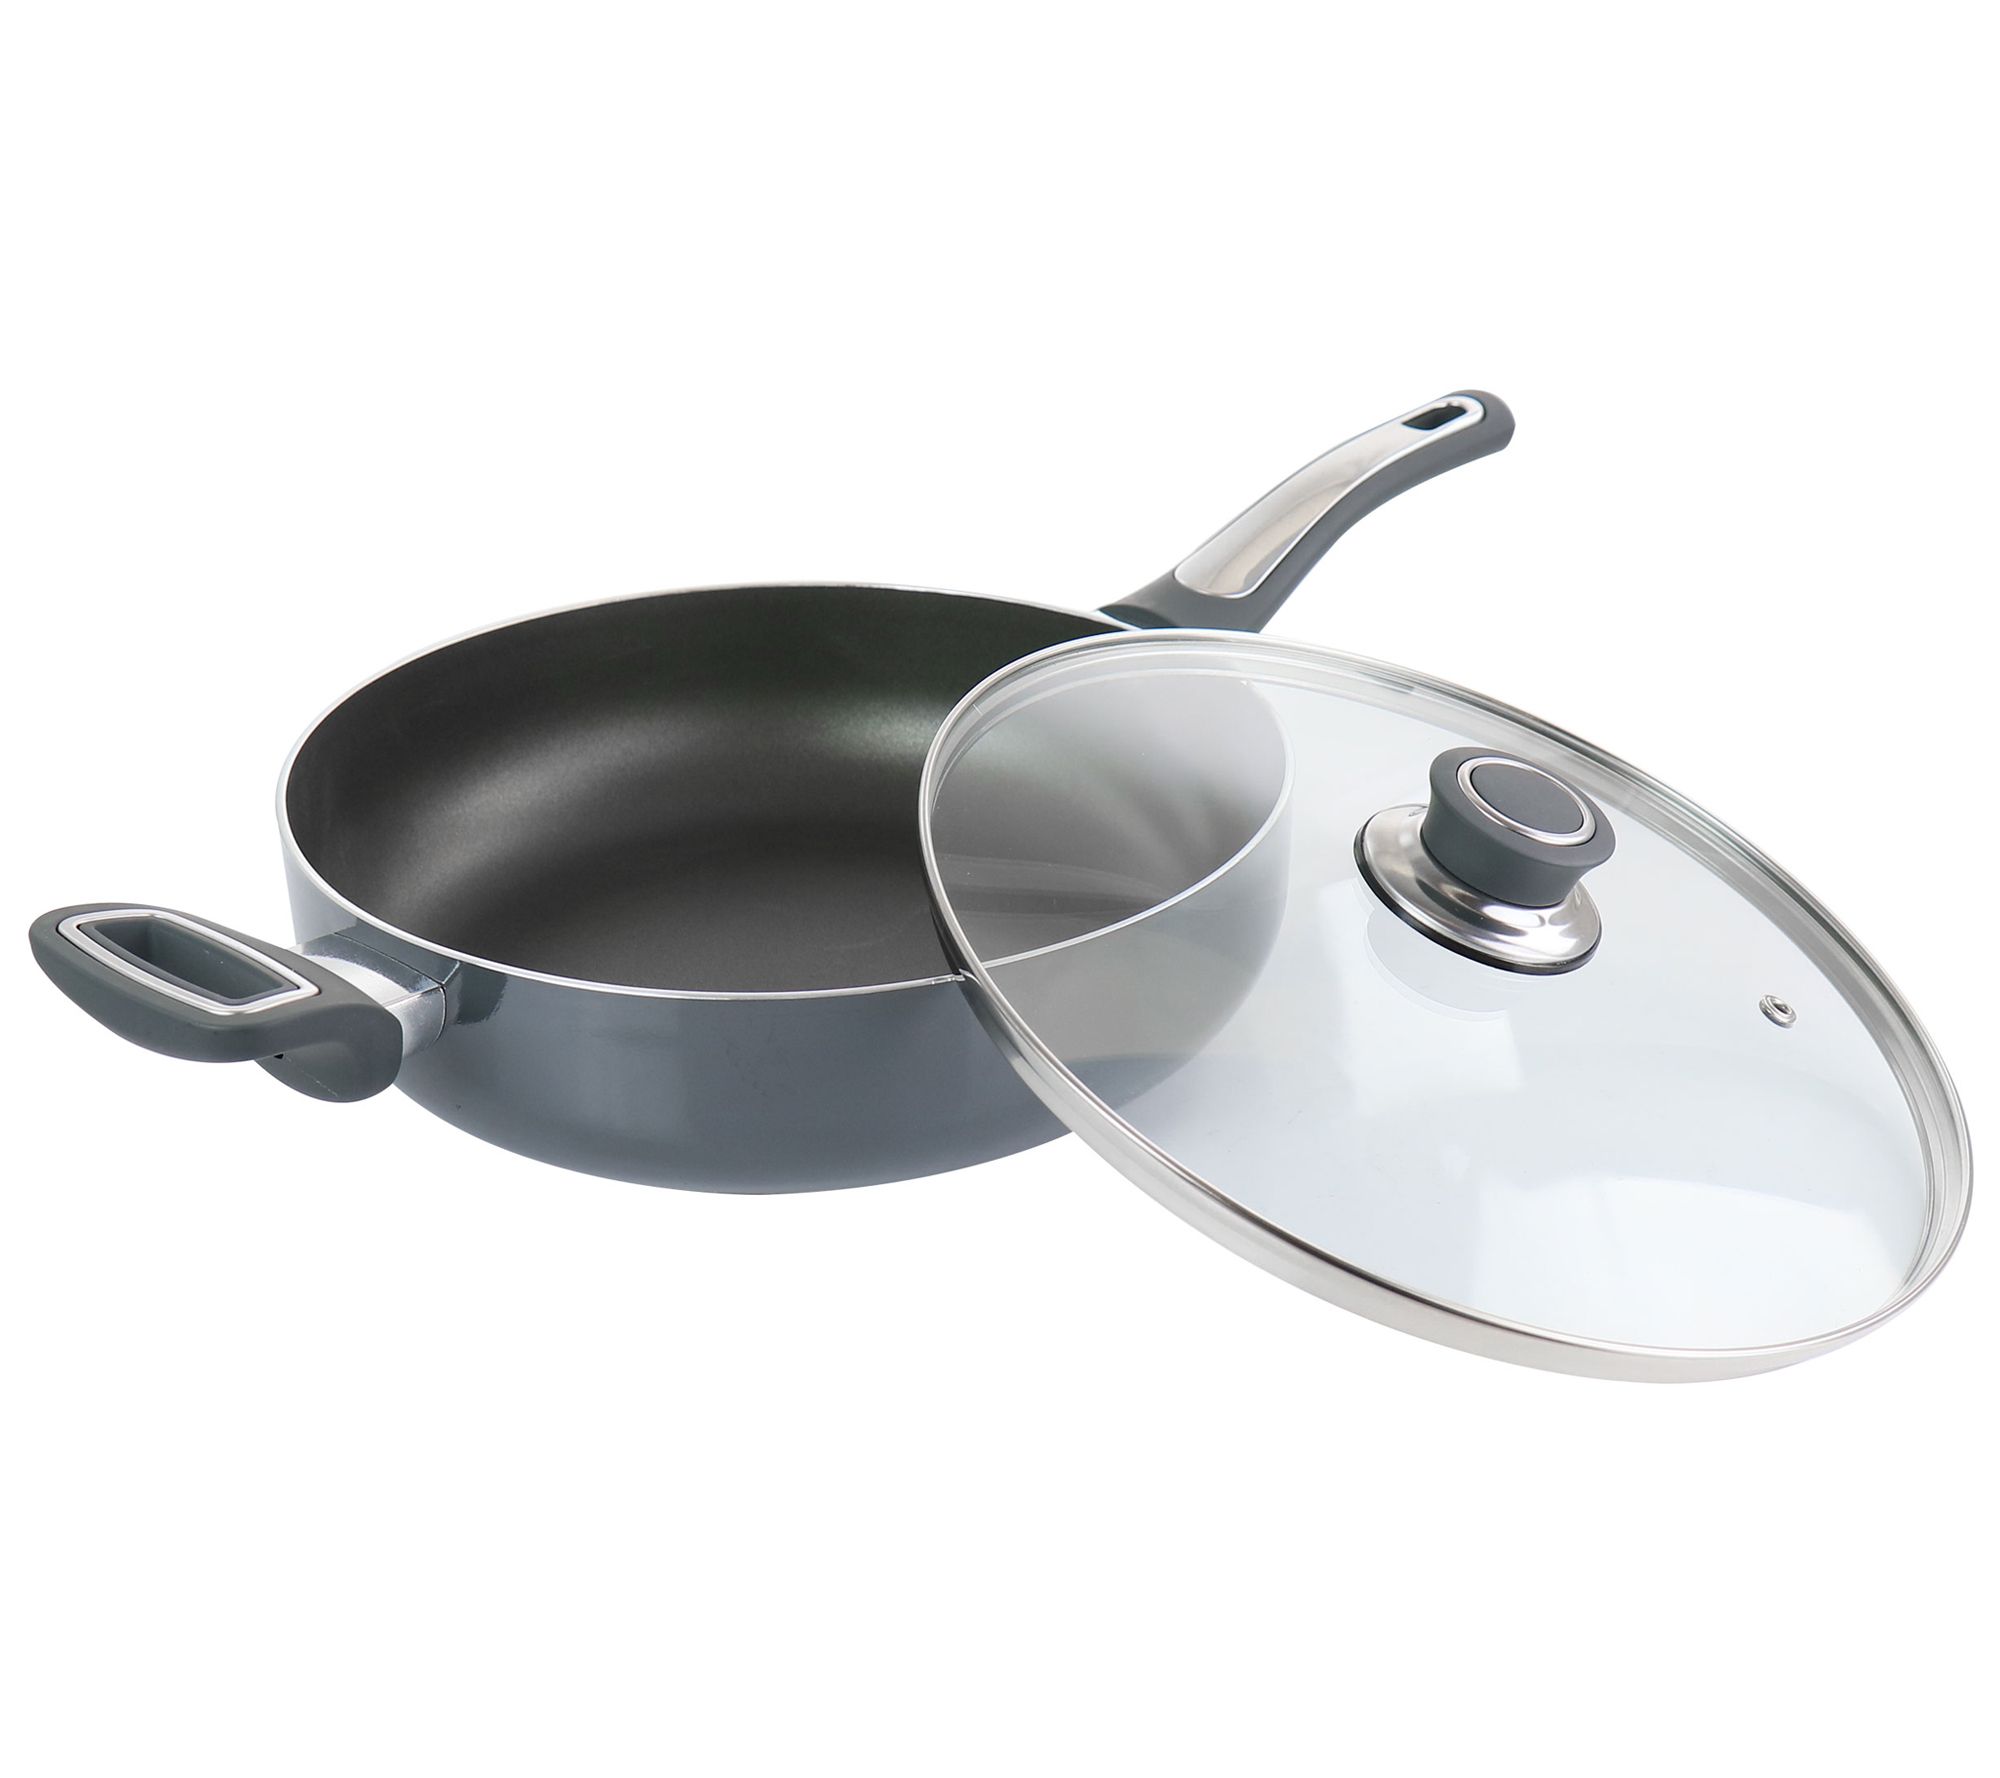 Oster 3.5 Quart Nonstick Aluminum Saute Pan with Lid in Gray - On